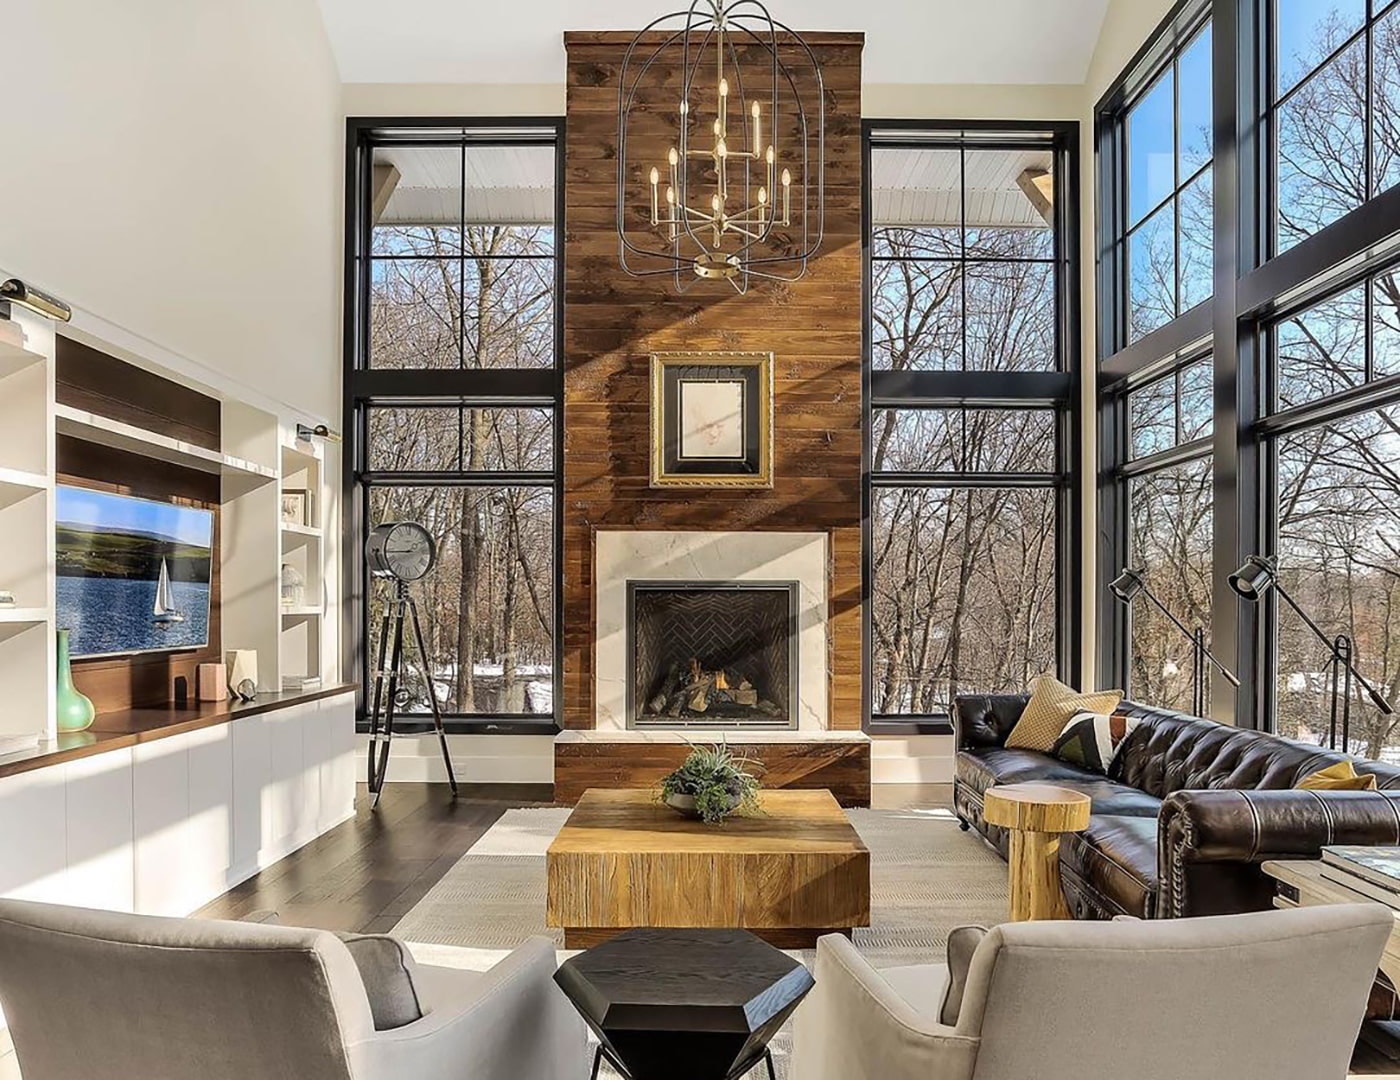 A living room with a high ceiling has floor to ceiling windows and a tall wood fireplace, topped with a grandiose chandelier.